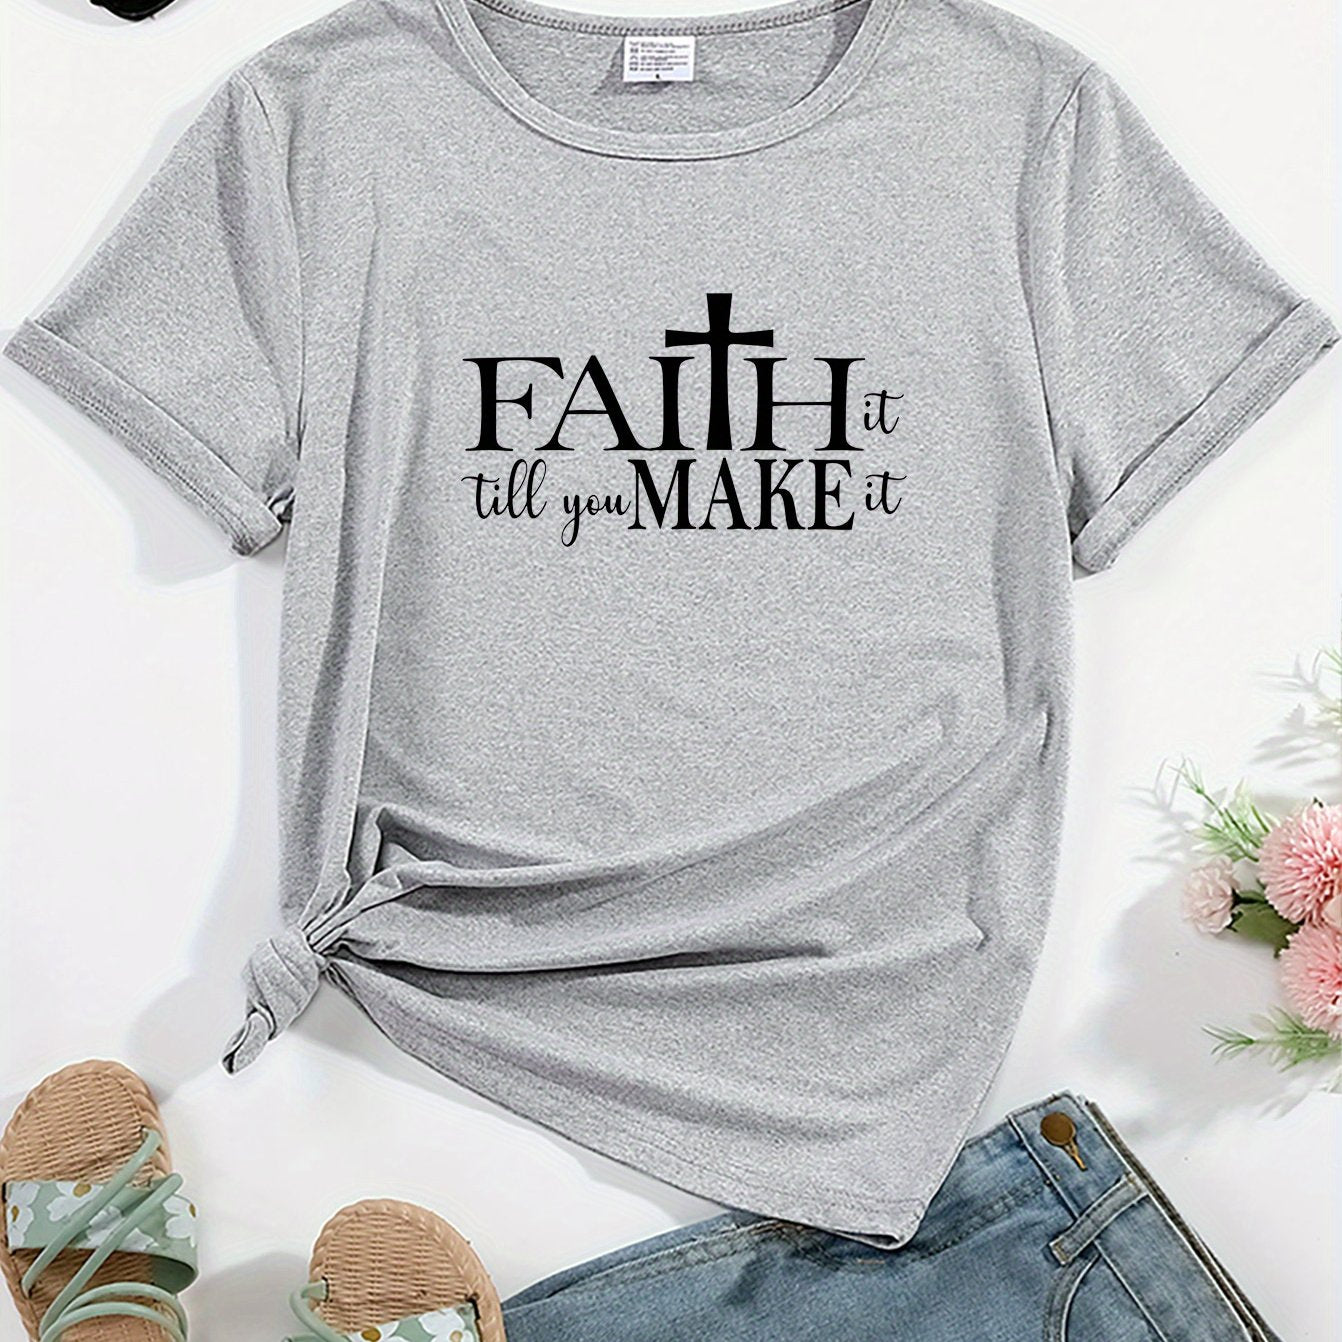 Faith Letter & Cross Graphic Crew Neck Sports Tee, Workout Short Sleeves Running Tops, Women's Activewear claimedbygoddesigns